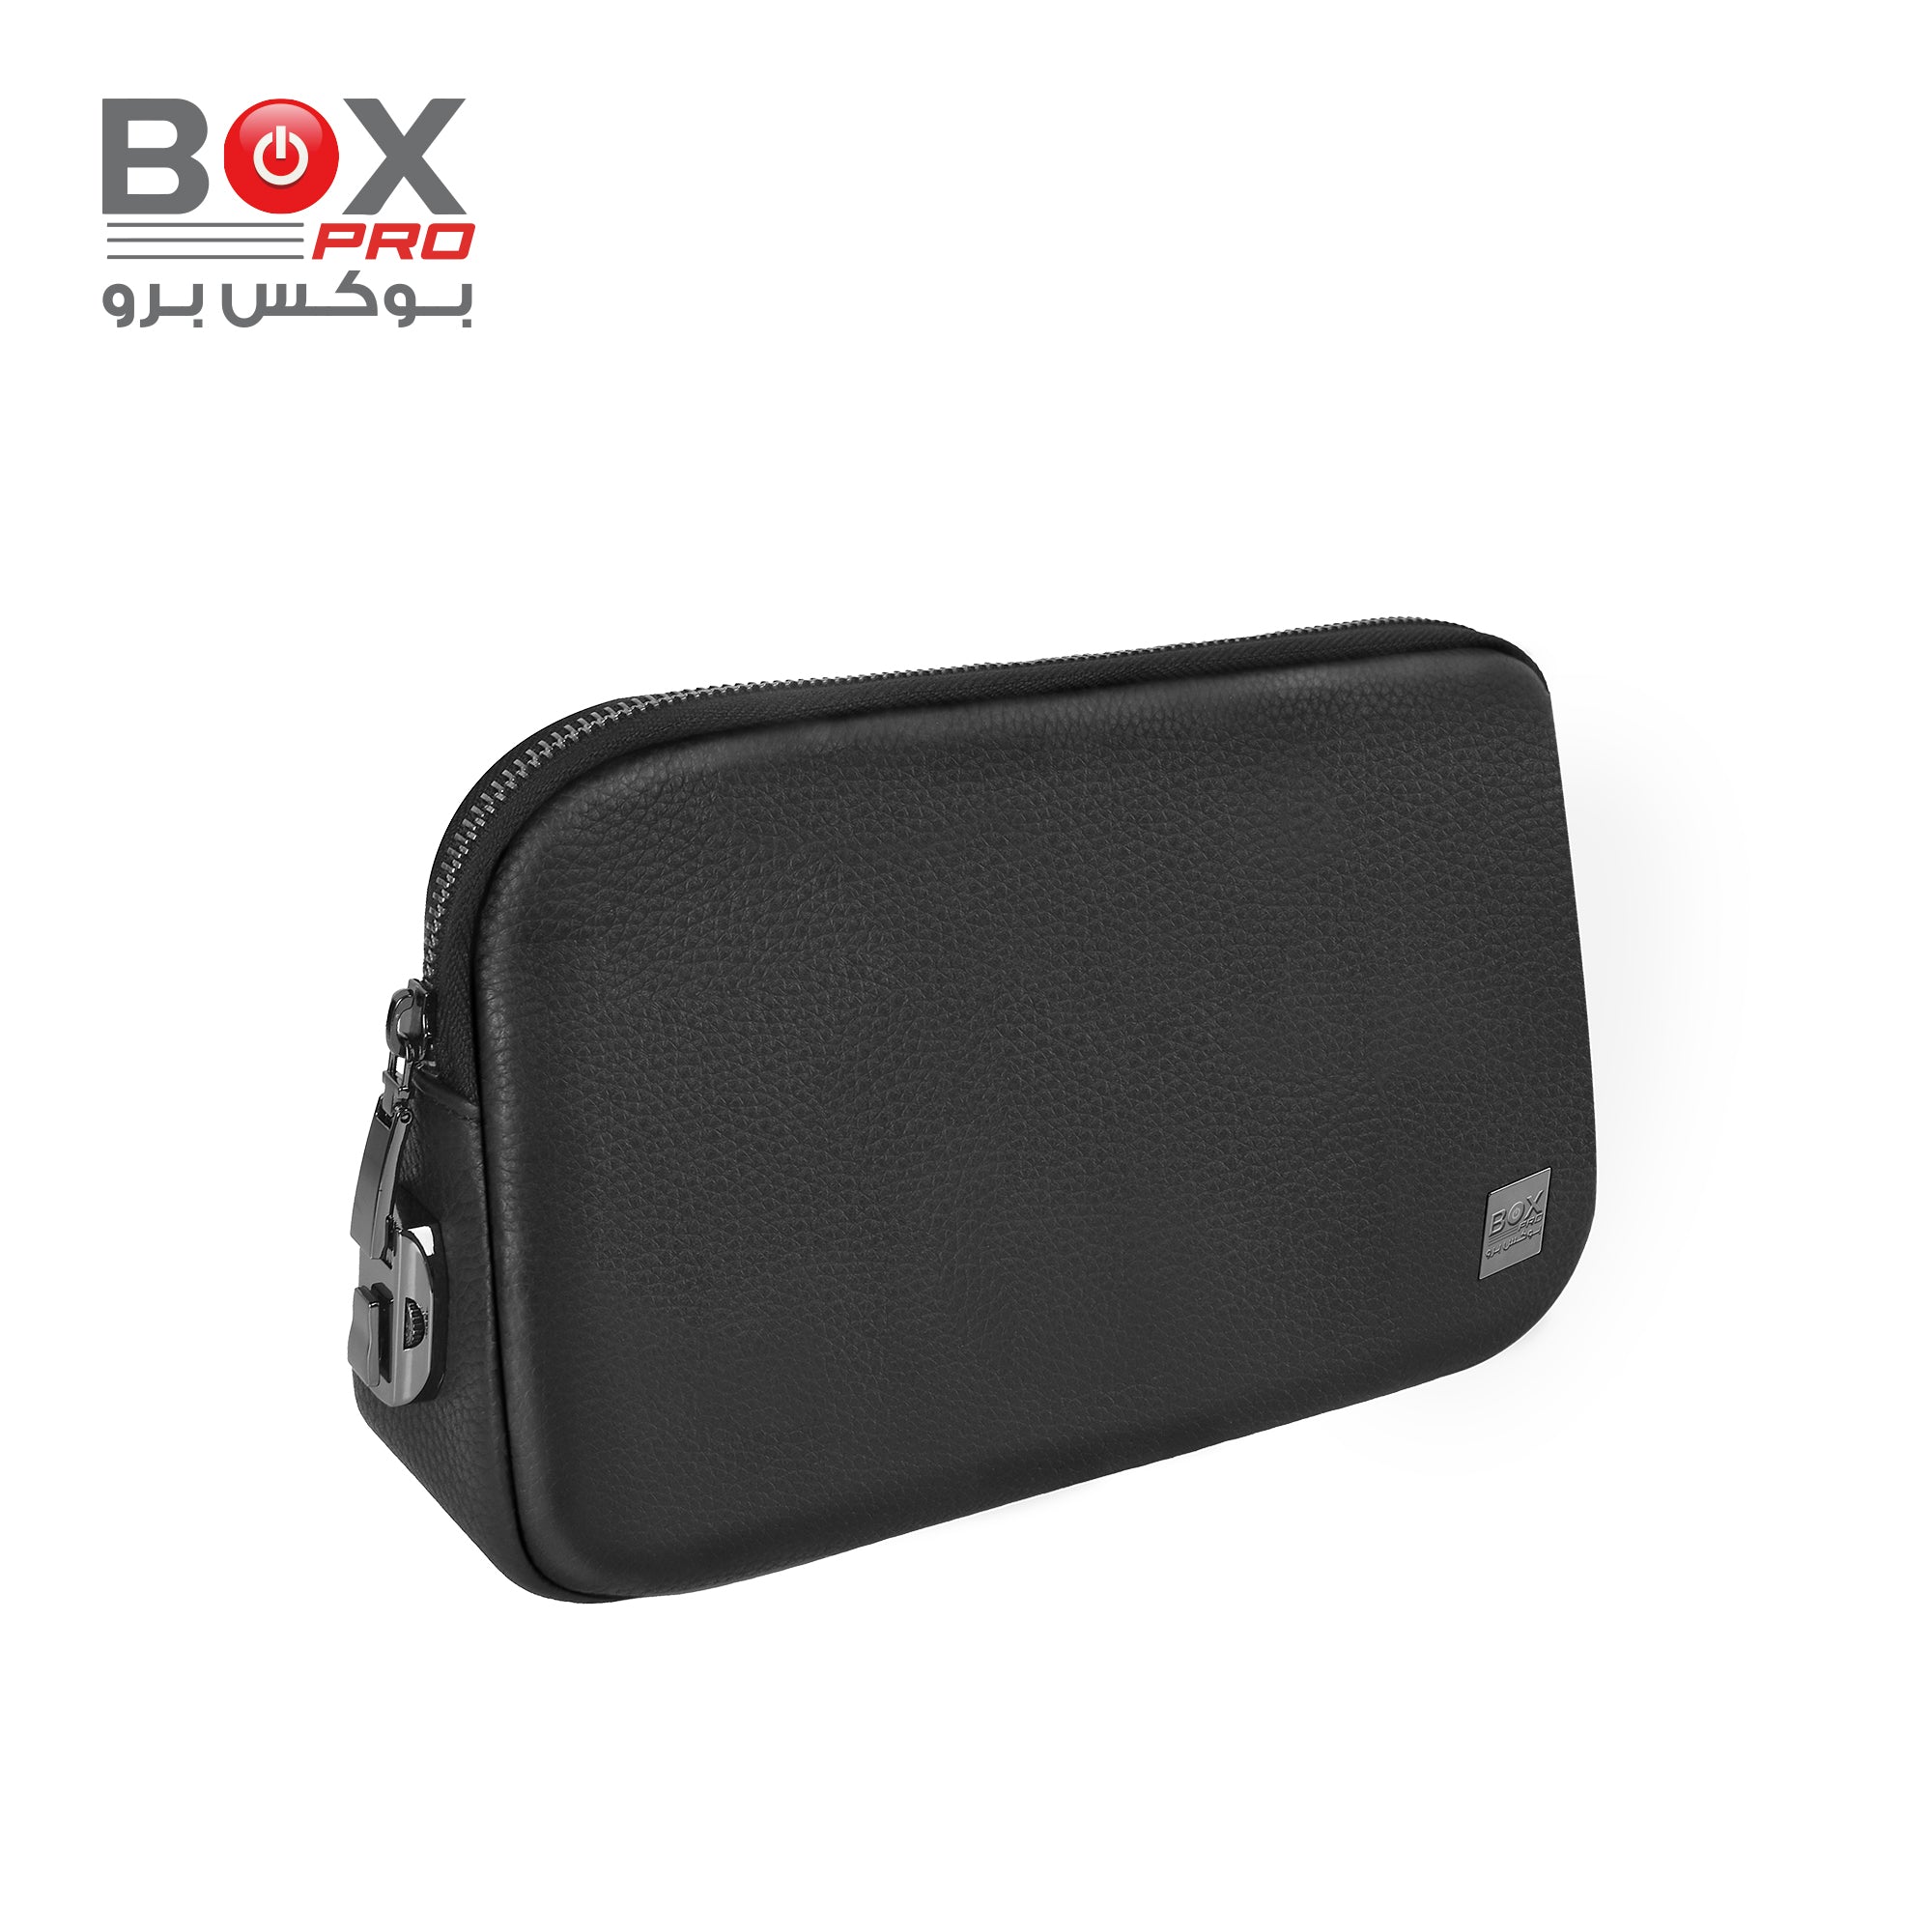 BoxPro Alpha Anti-theft Clutch Bag Travel In Style - Black